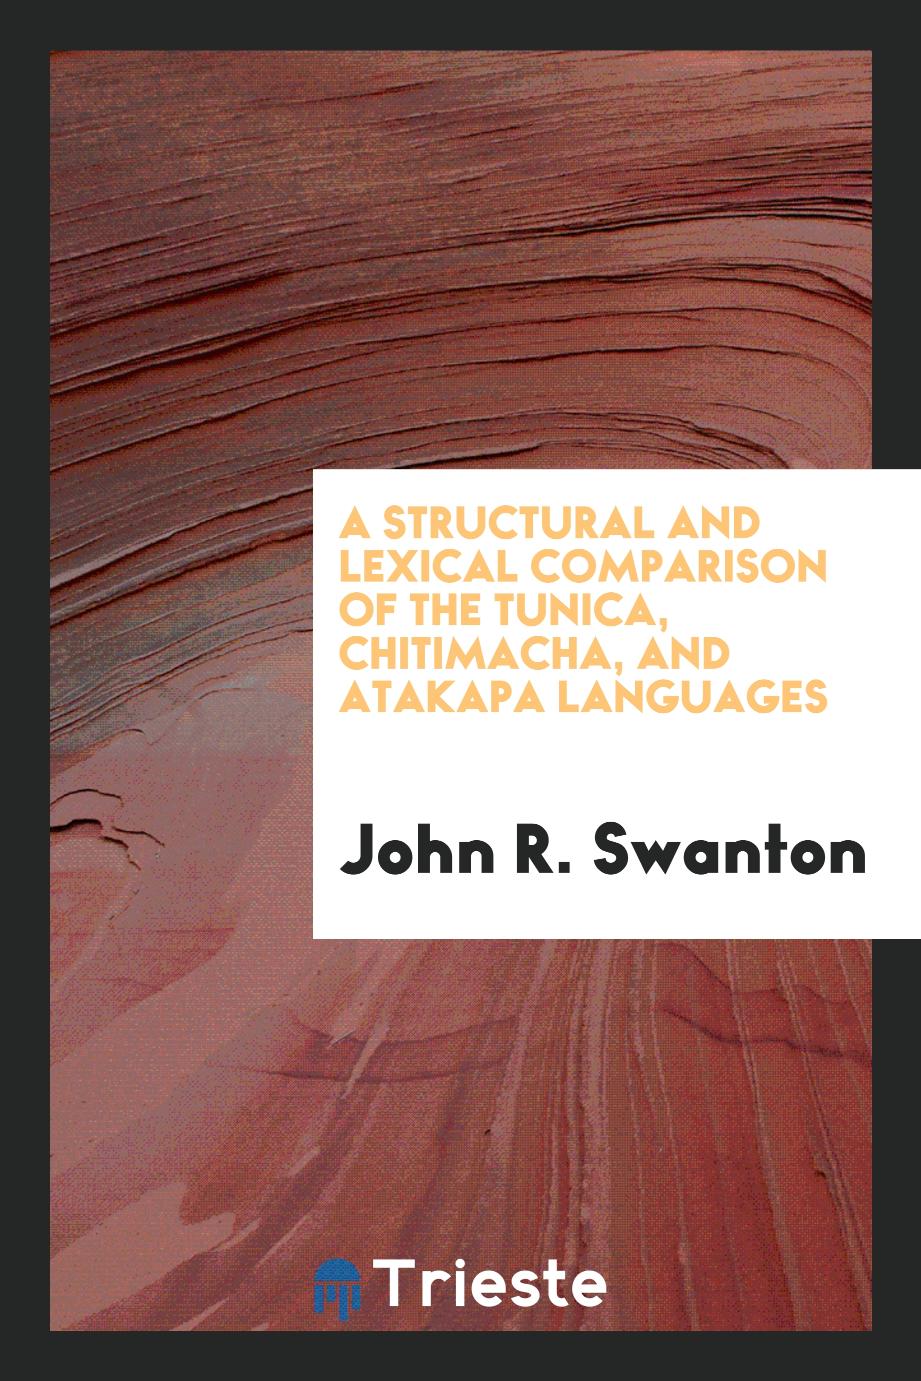 A Structural and Lexical Comparison of the Tunica, Chitimacha, and Atakapa languages